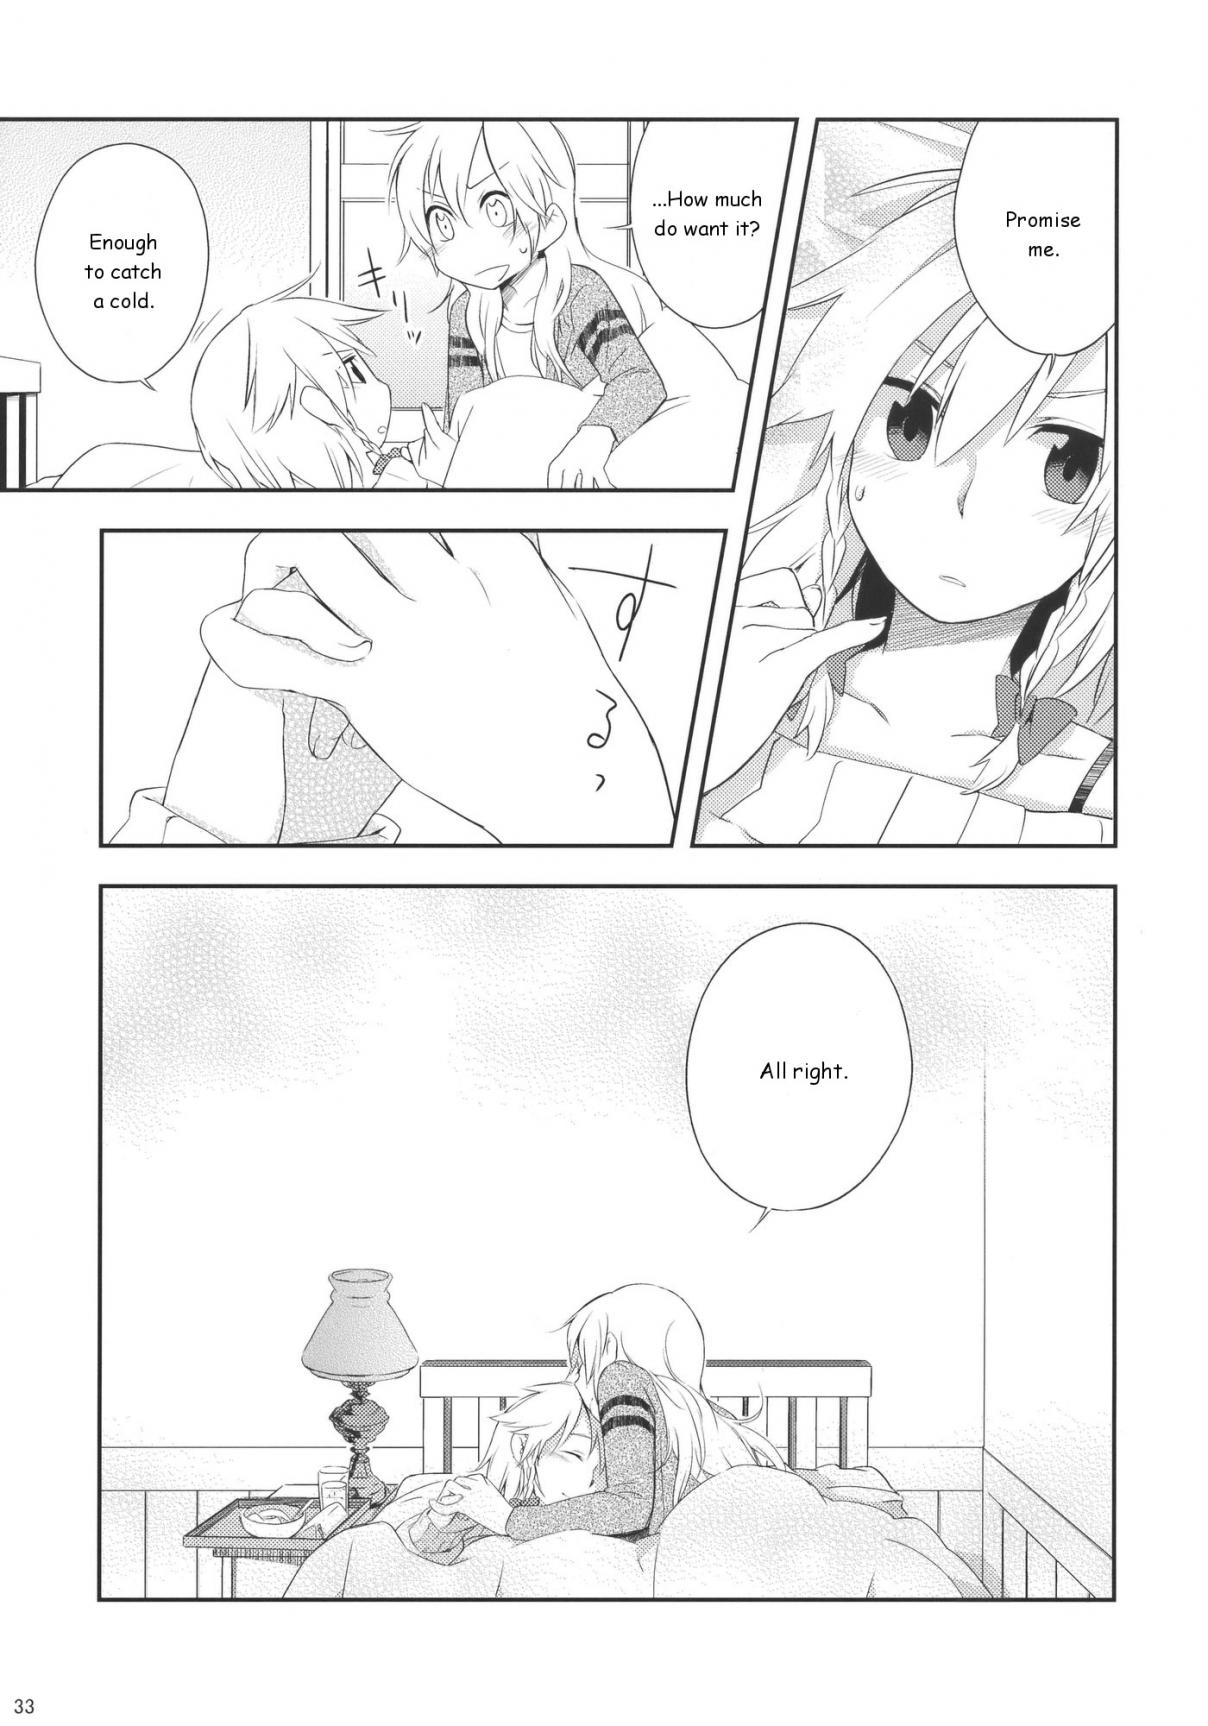 Touhou How to hold hands Oneshot